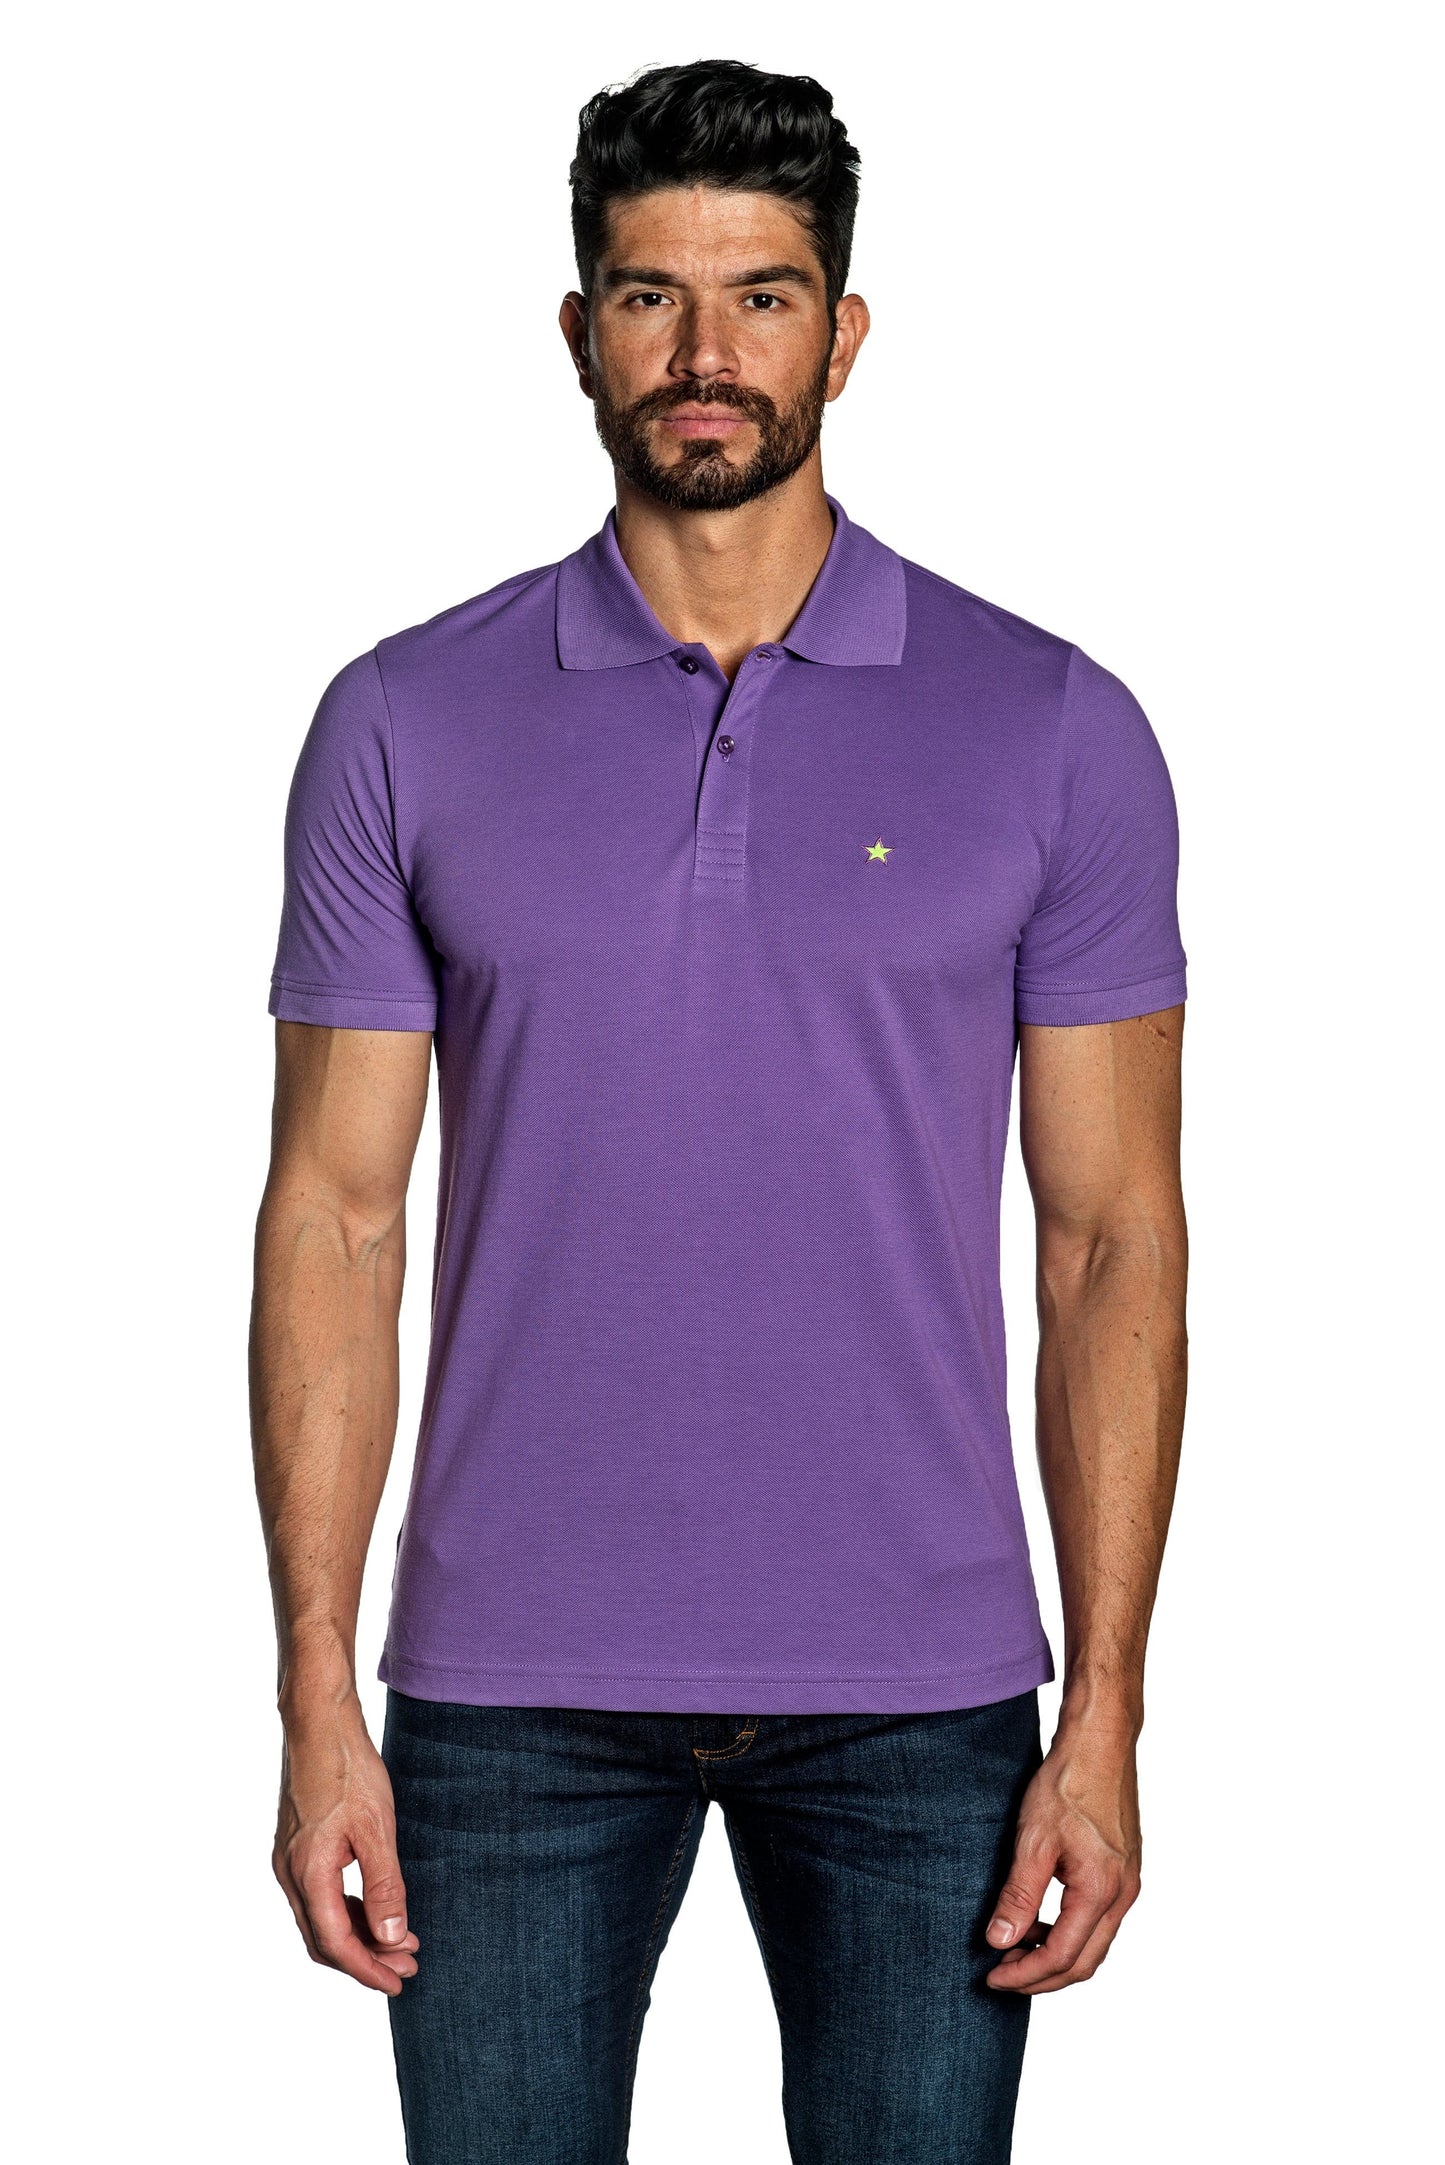 Purple Mens Polo With Star Embroidery P-24.